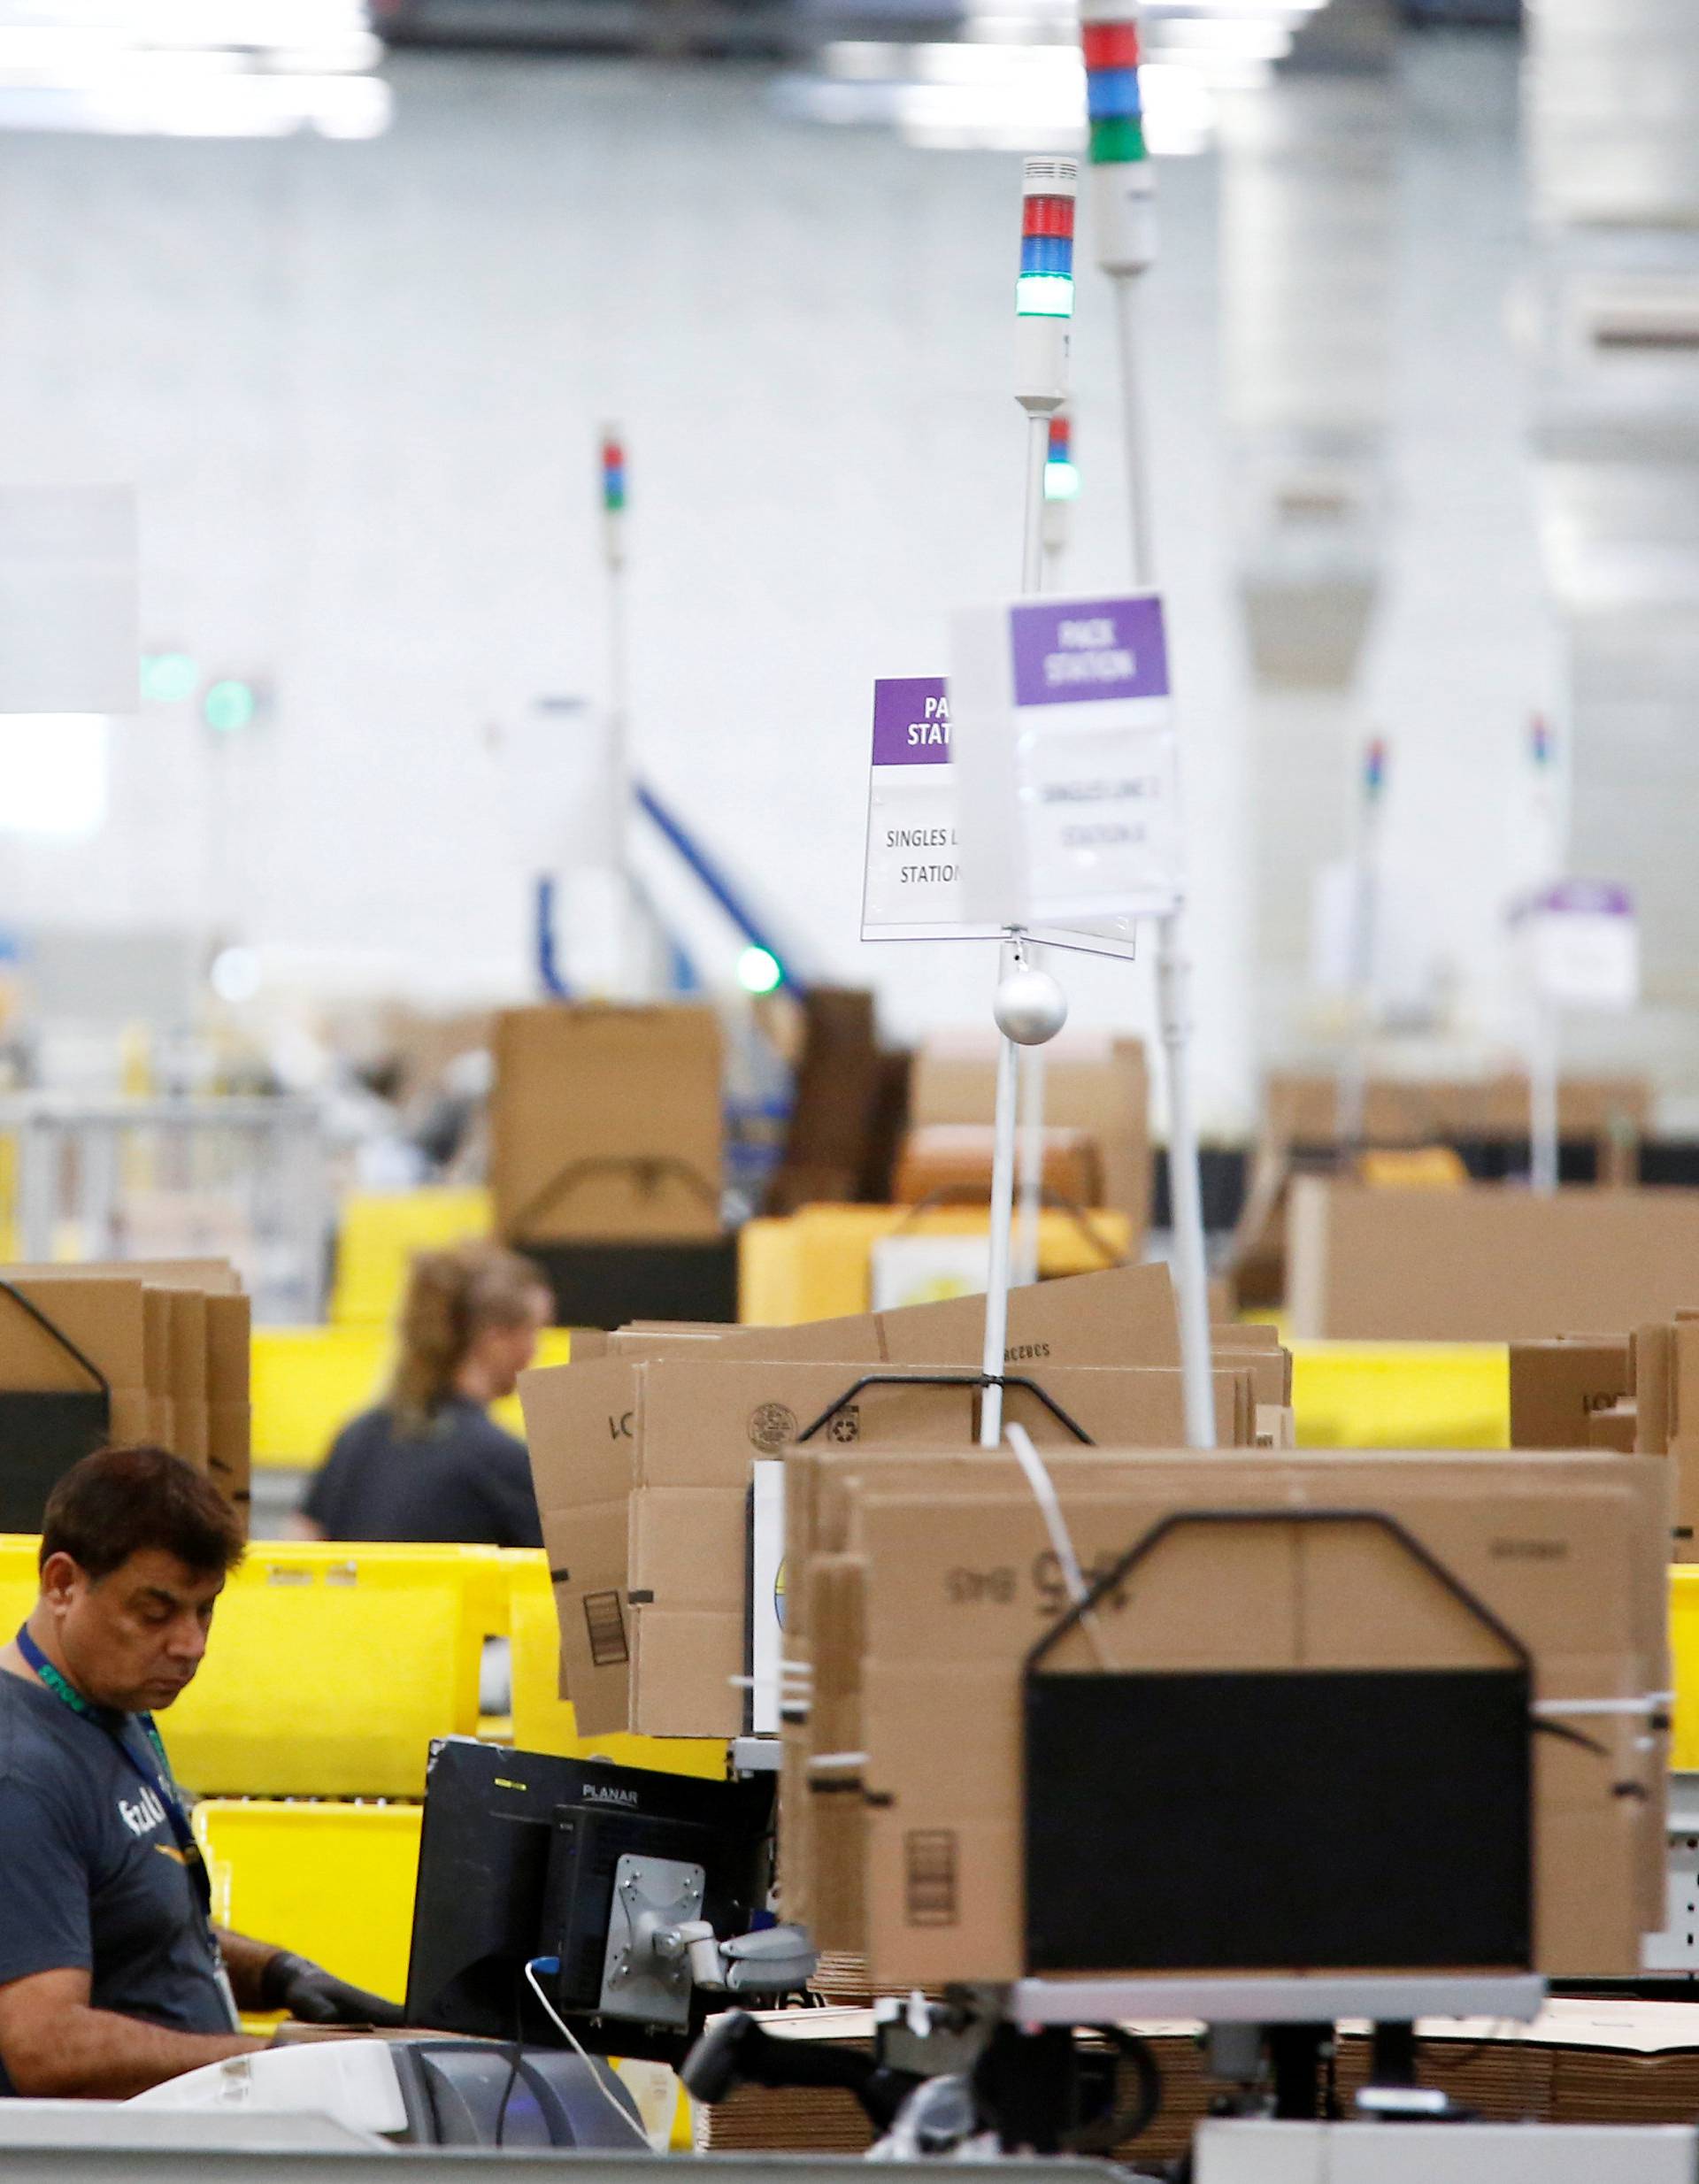 FILE PHOTO: Employees work at packing stations on the main floor at the Amazon fulfillment center in Kent